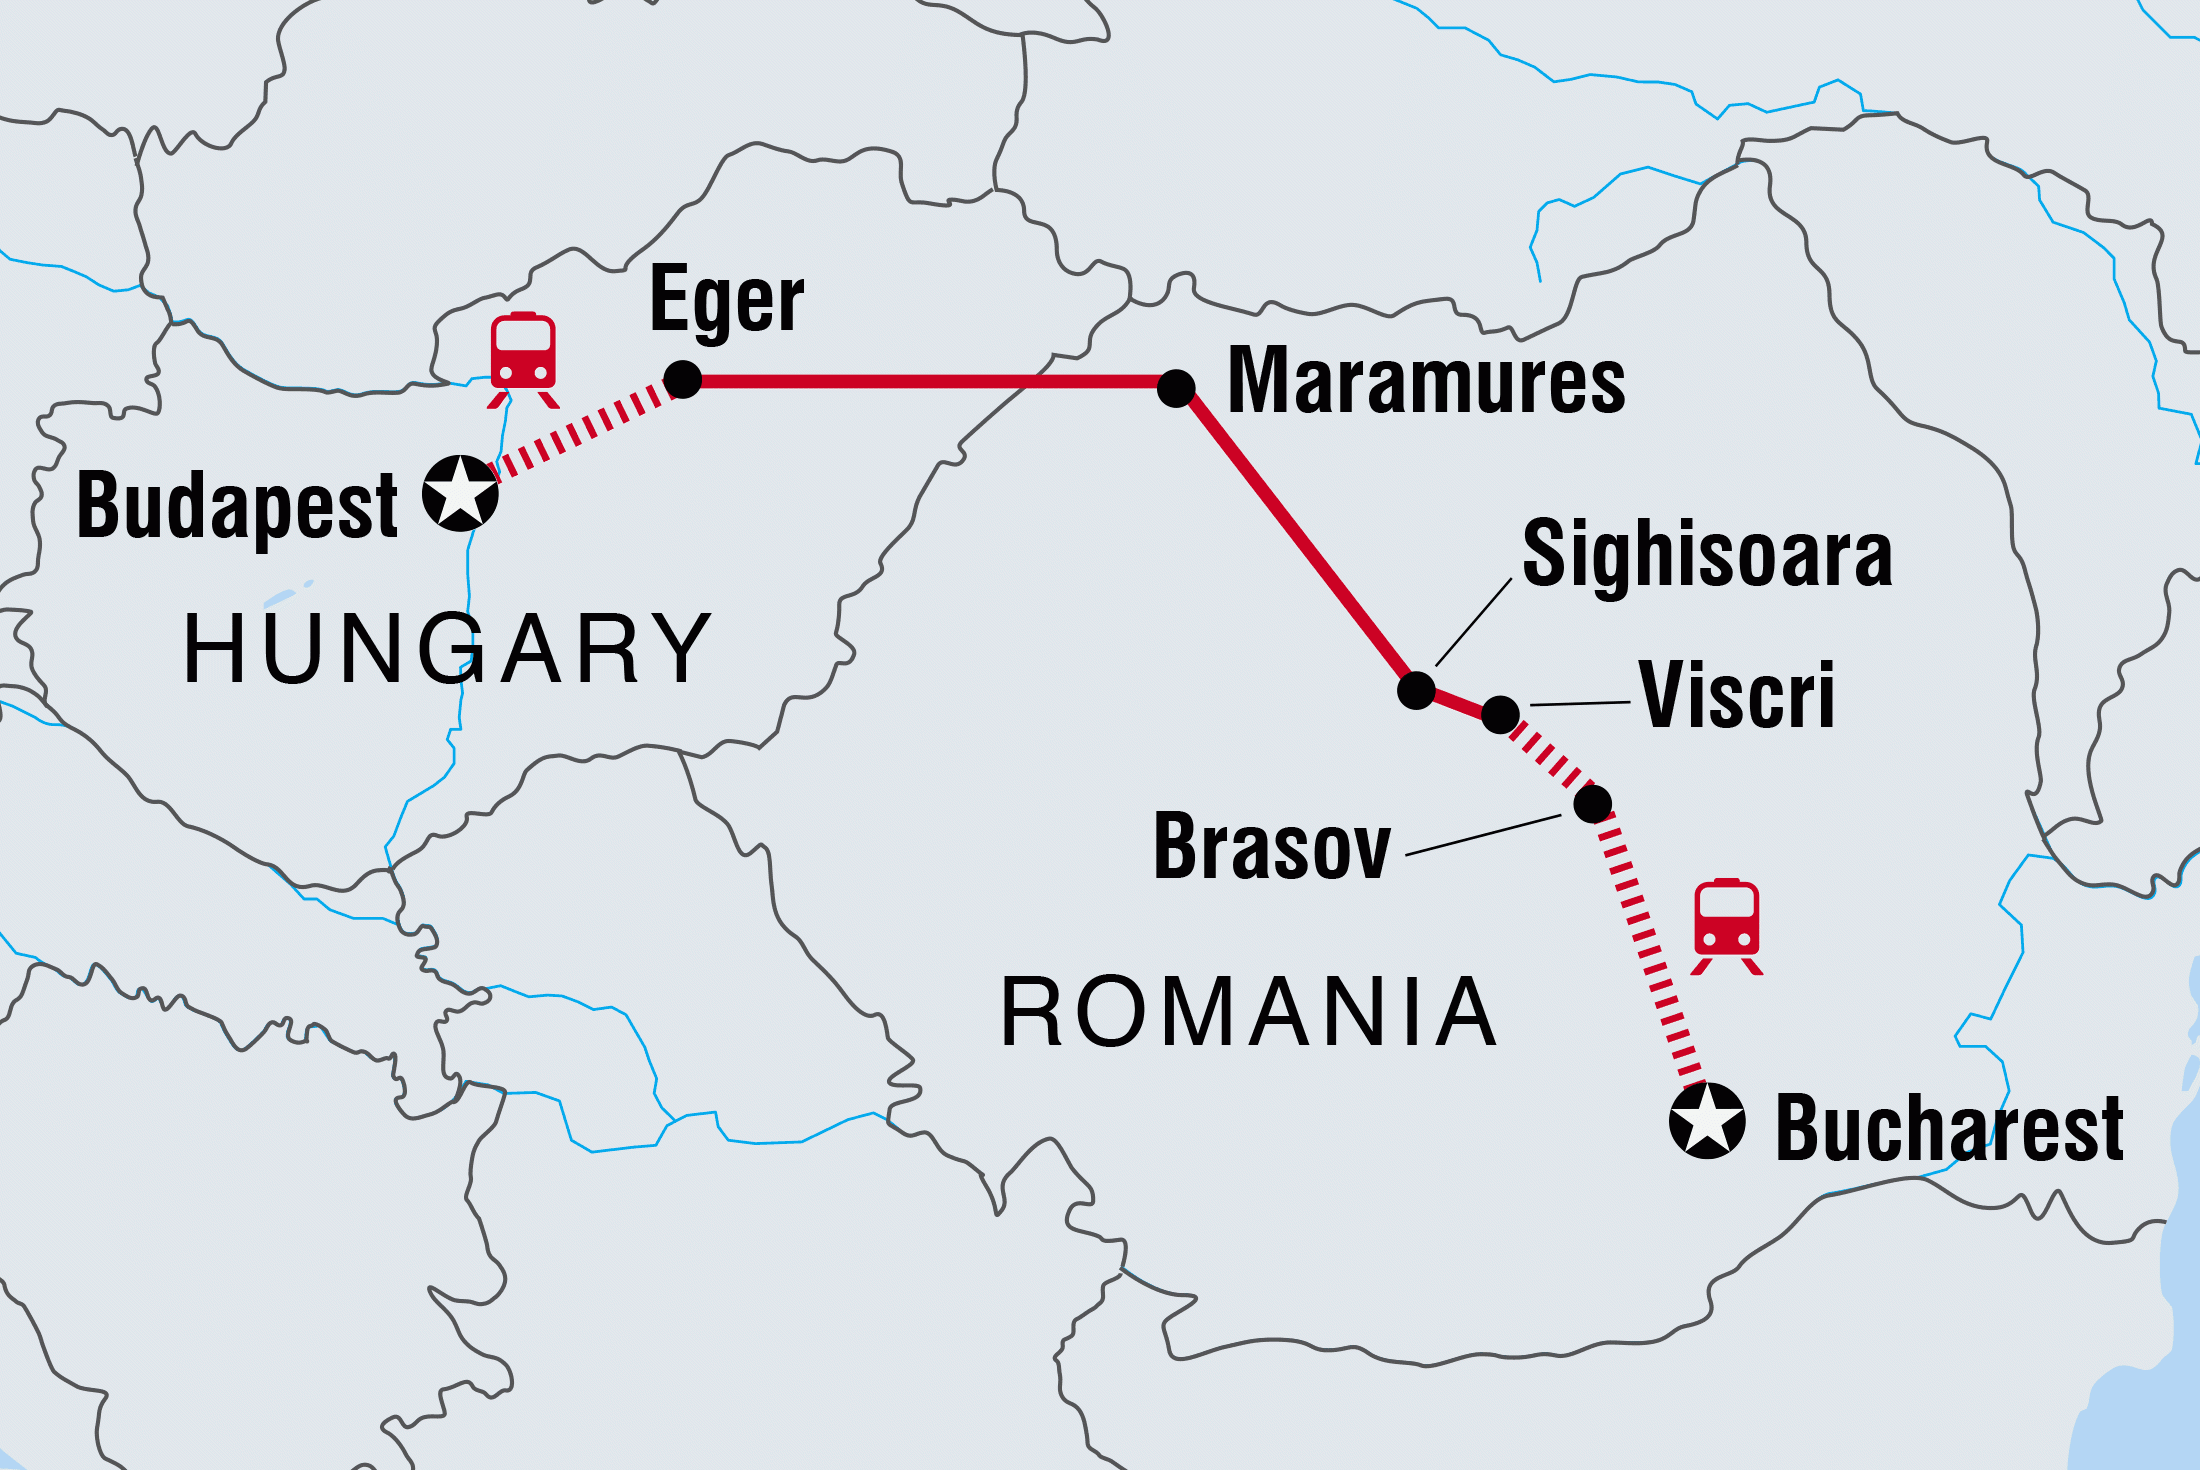 Map of Budapest to Bucharest including Hungary and Romania